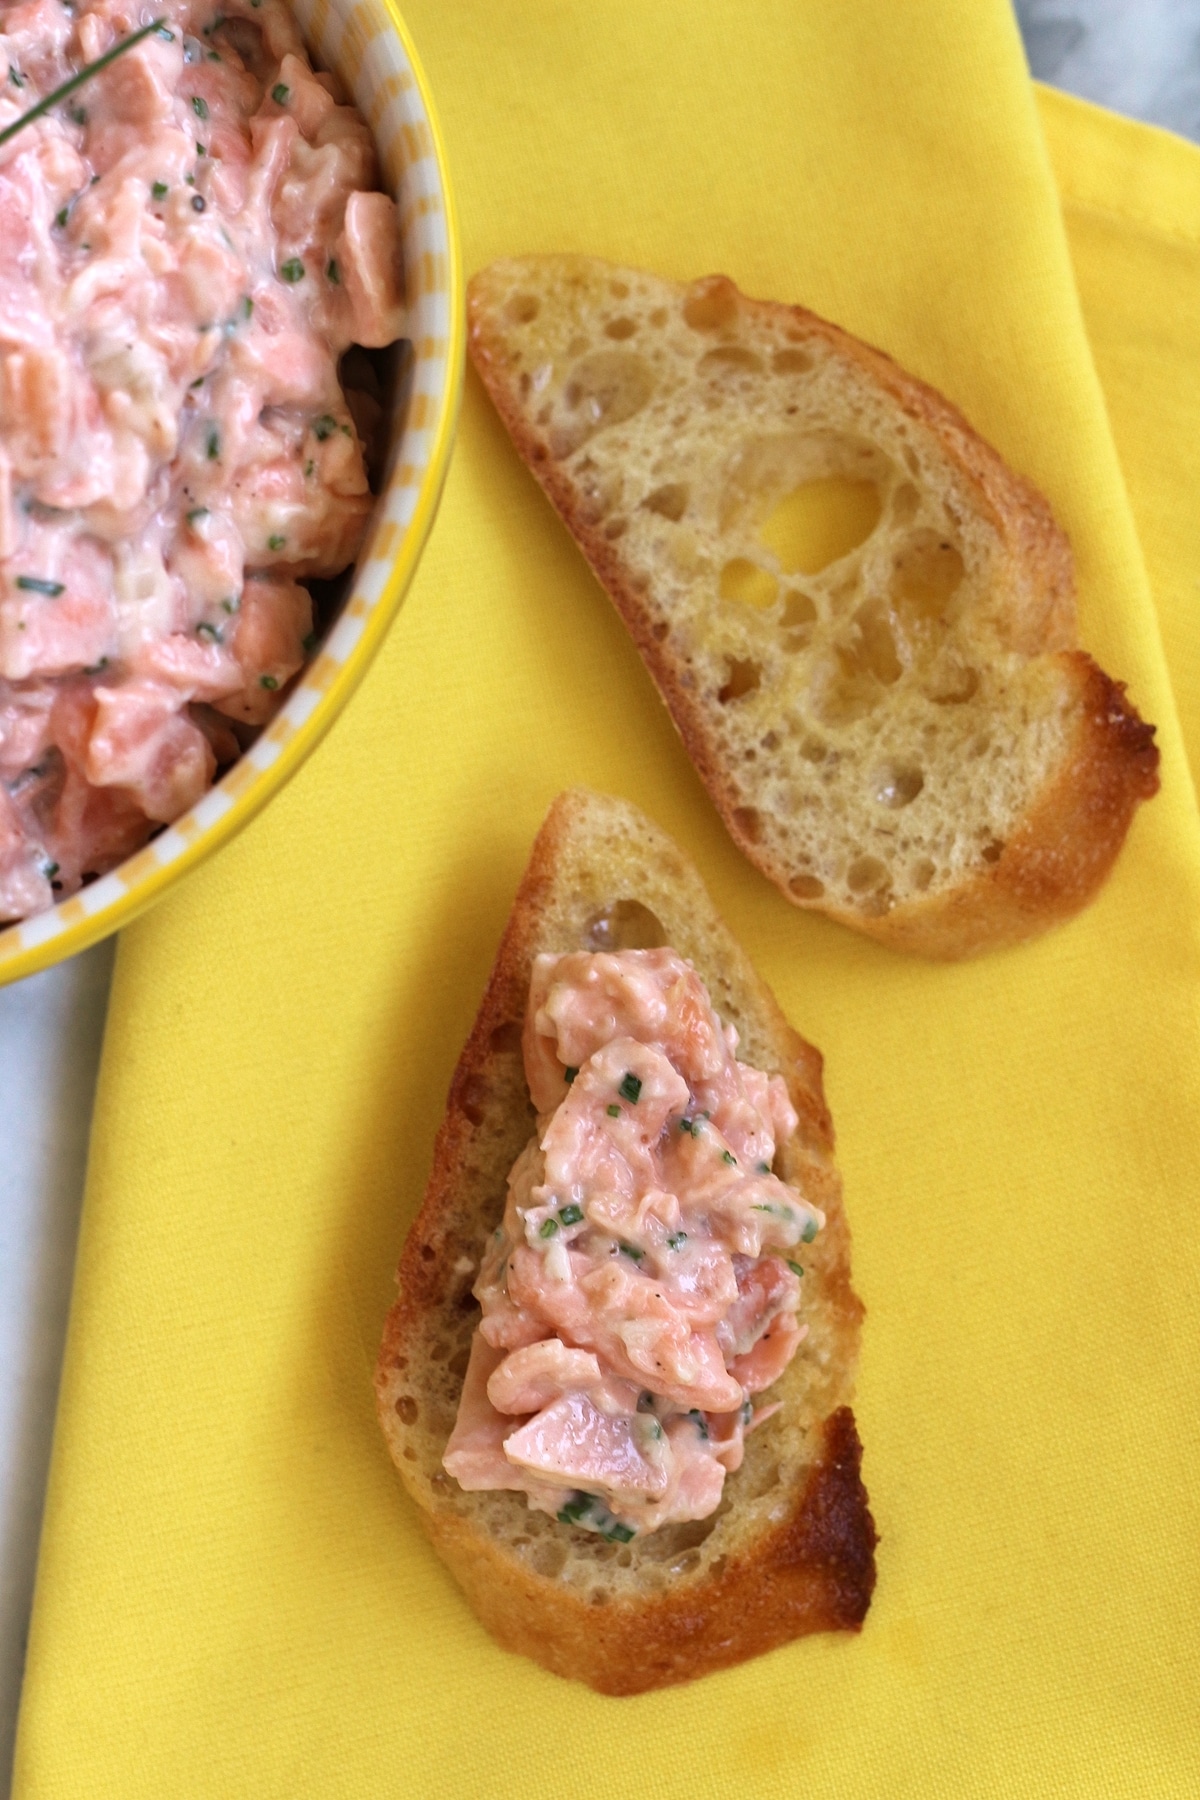 2 toasted baguette slices on a yellow napkin, 1 topped with salmon rillettes spread